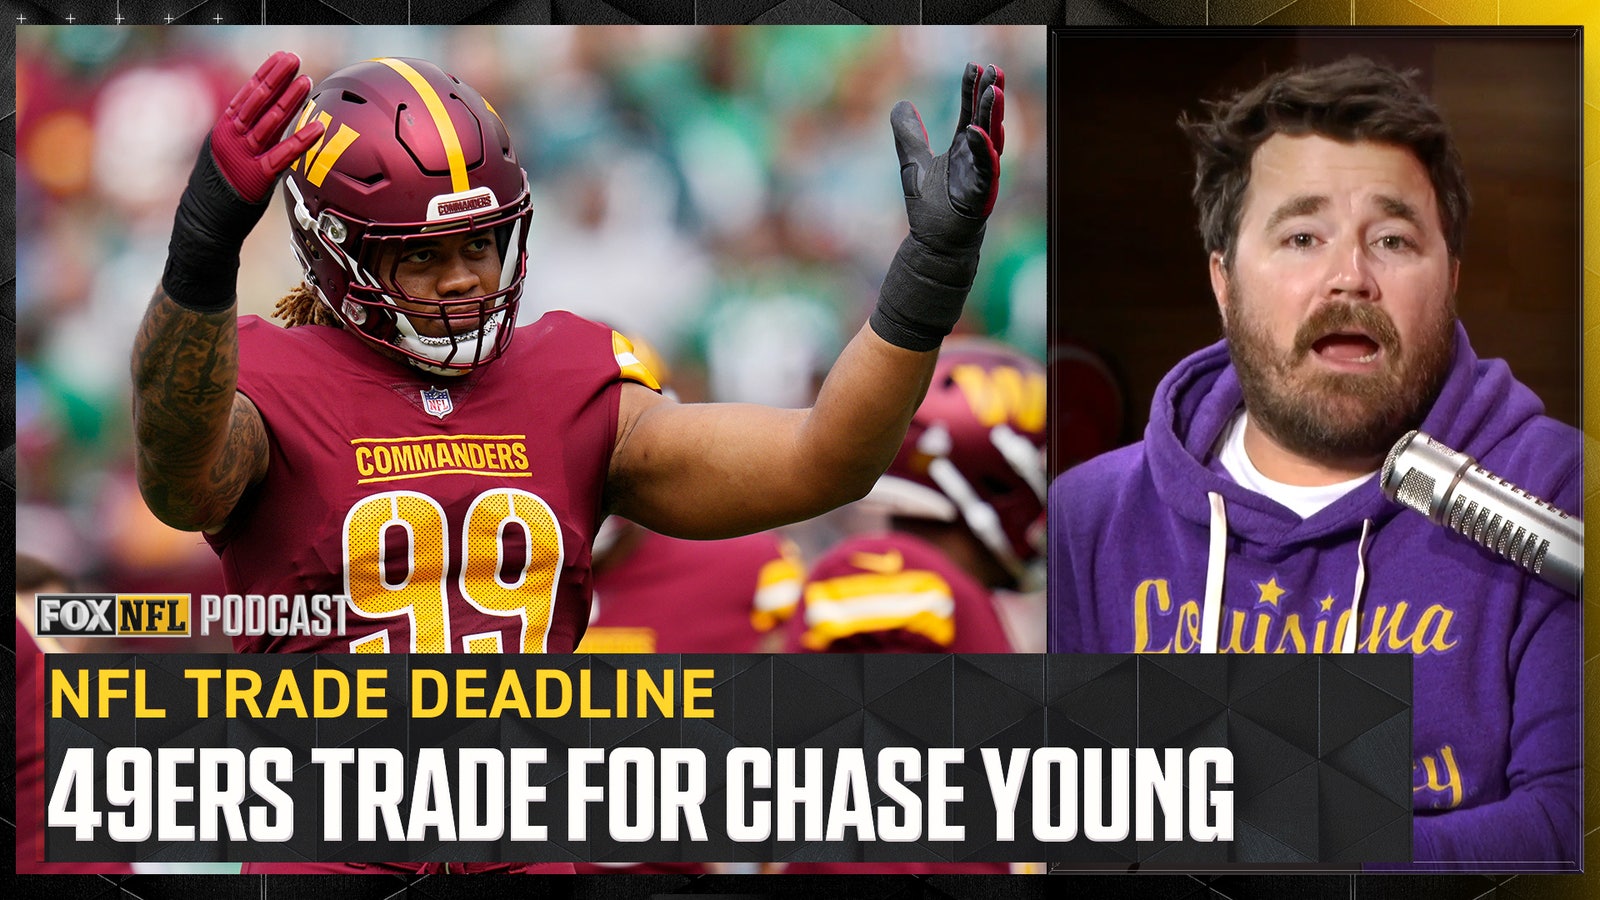 Did 49ers win the trade deadline with acquisition of Chase Young? 